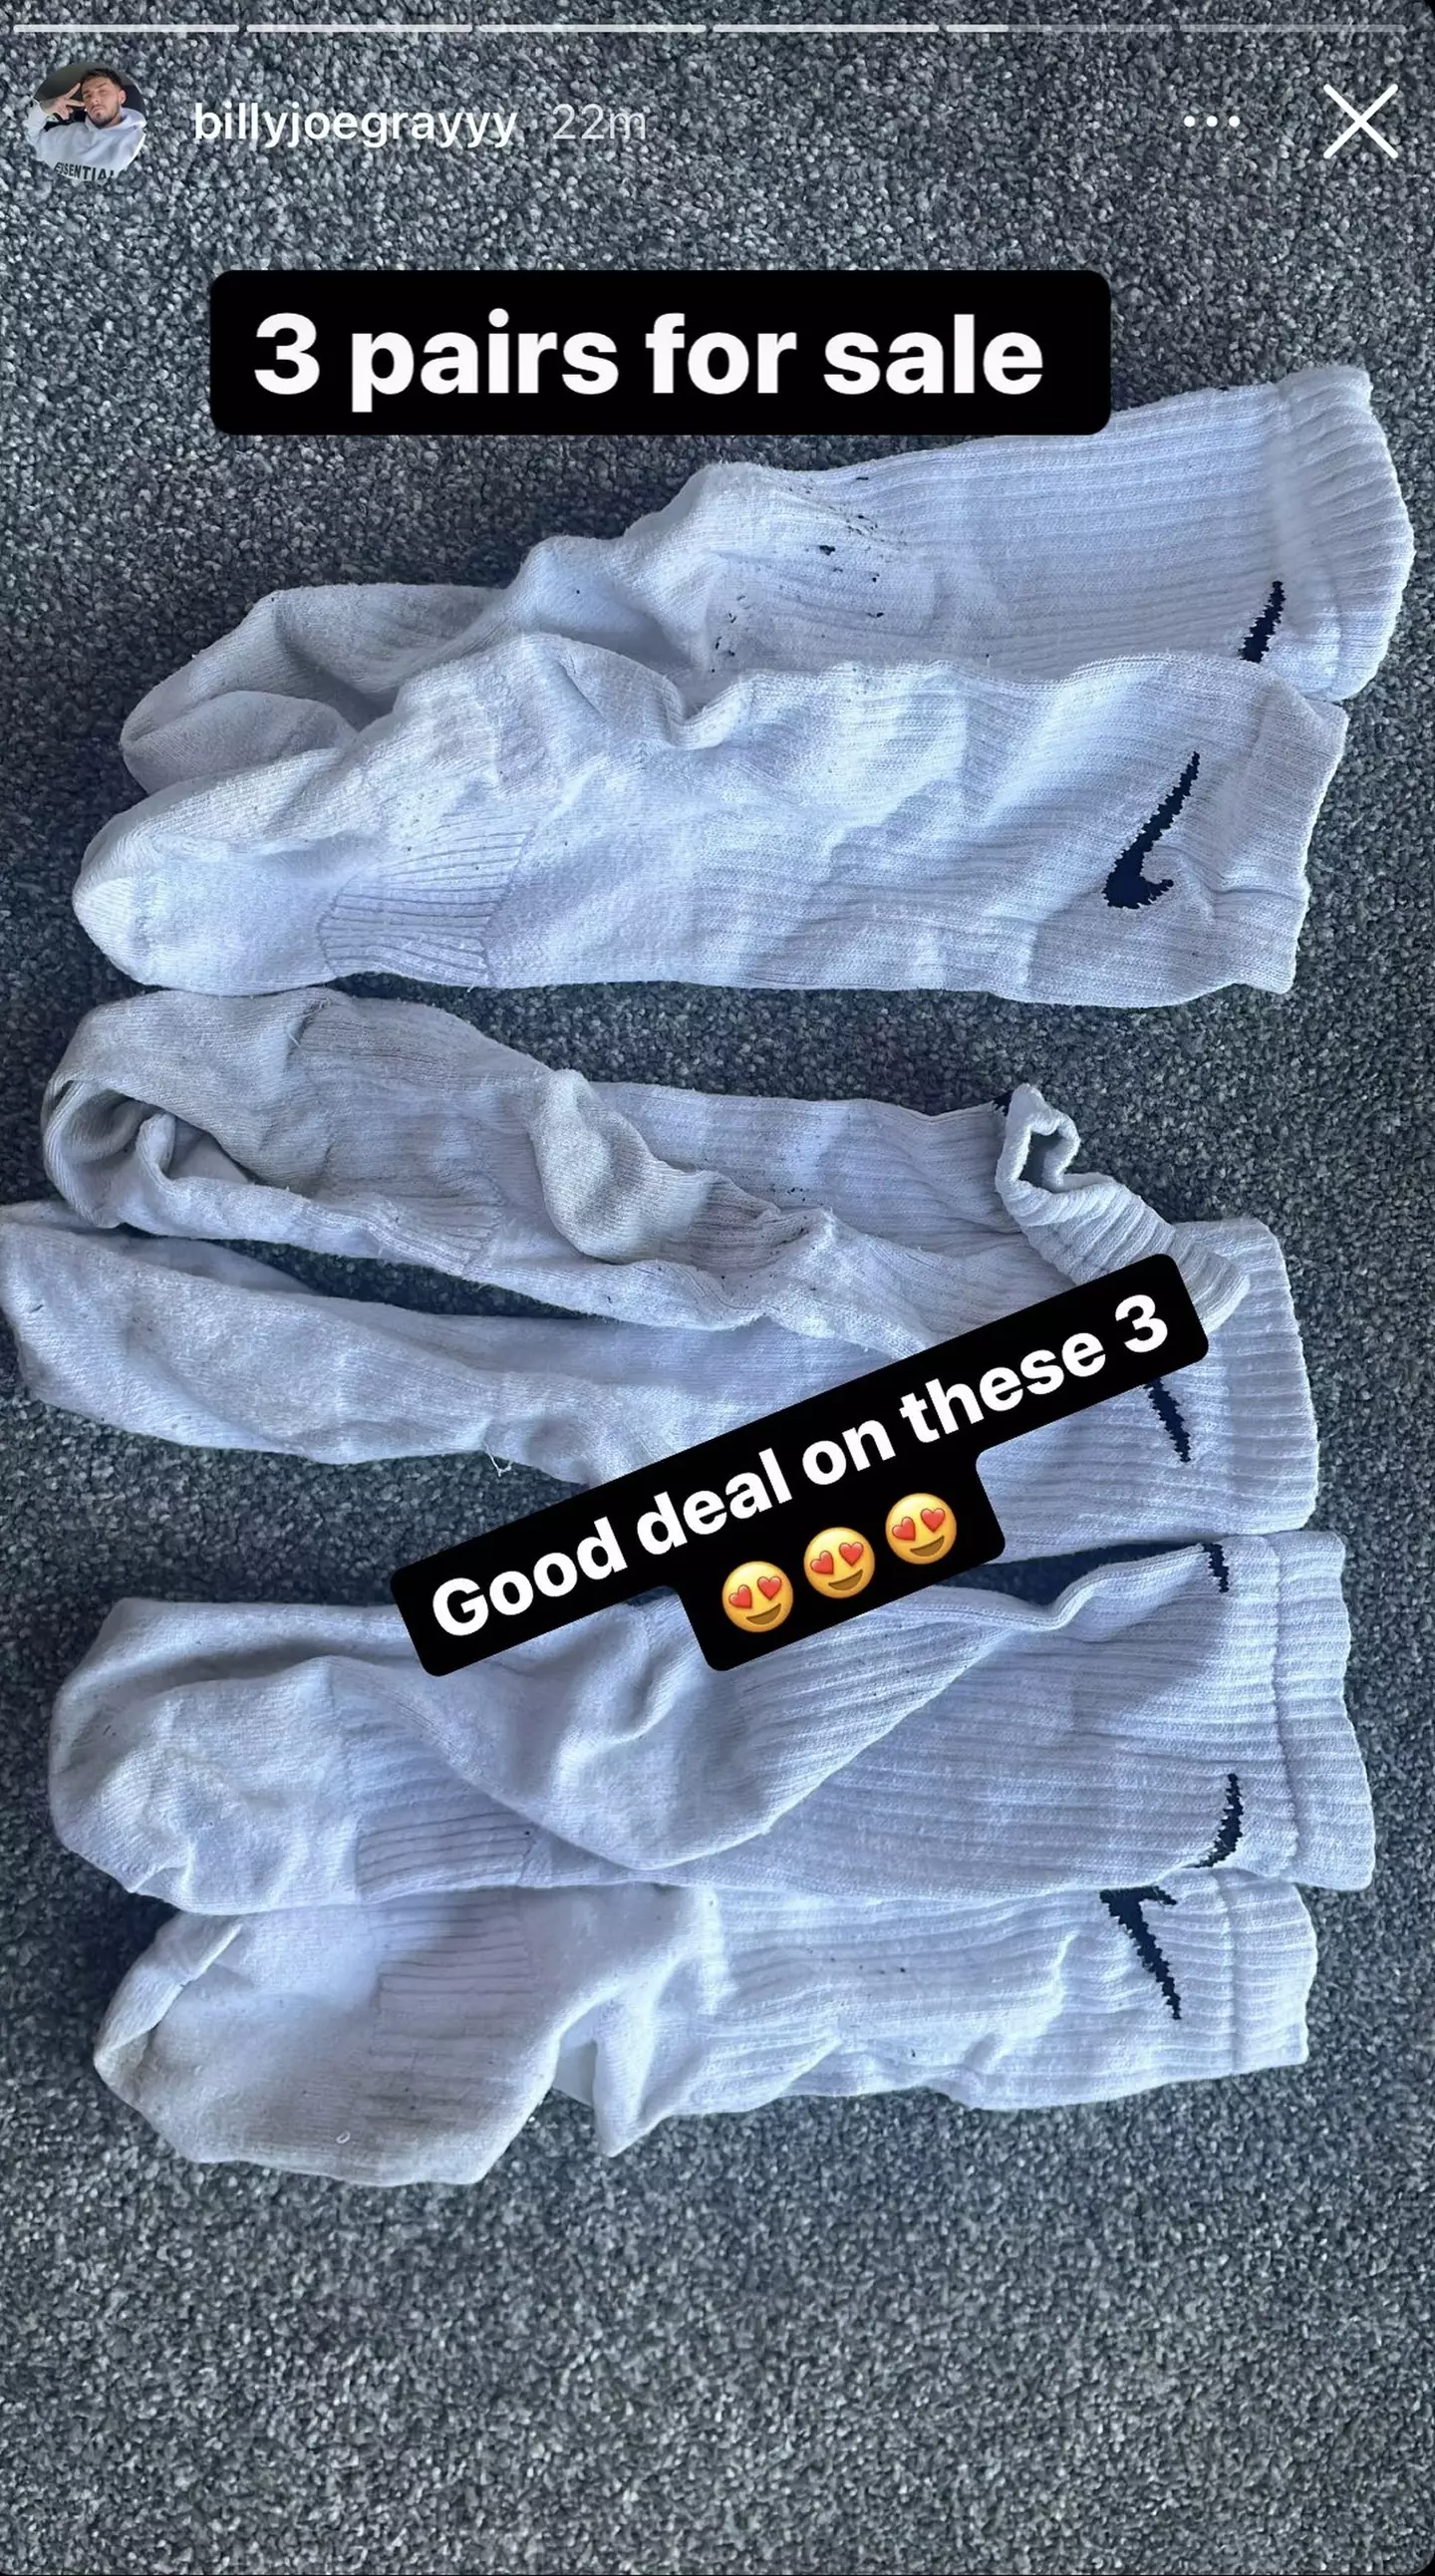 Man Makes Up To £1,600 A Month Selling His Used Socks